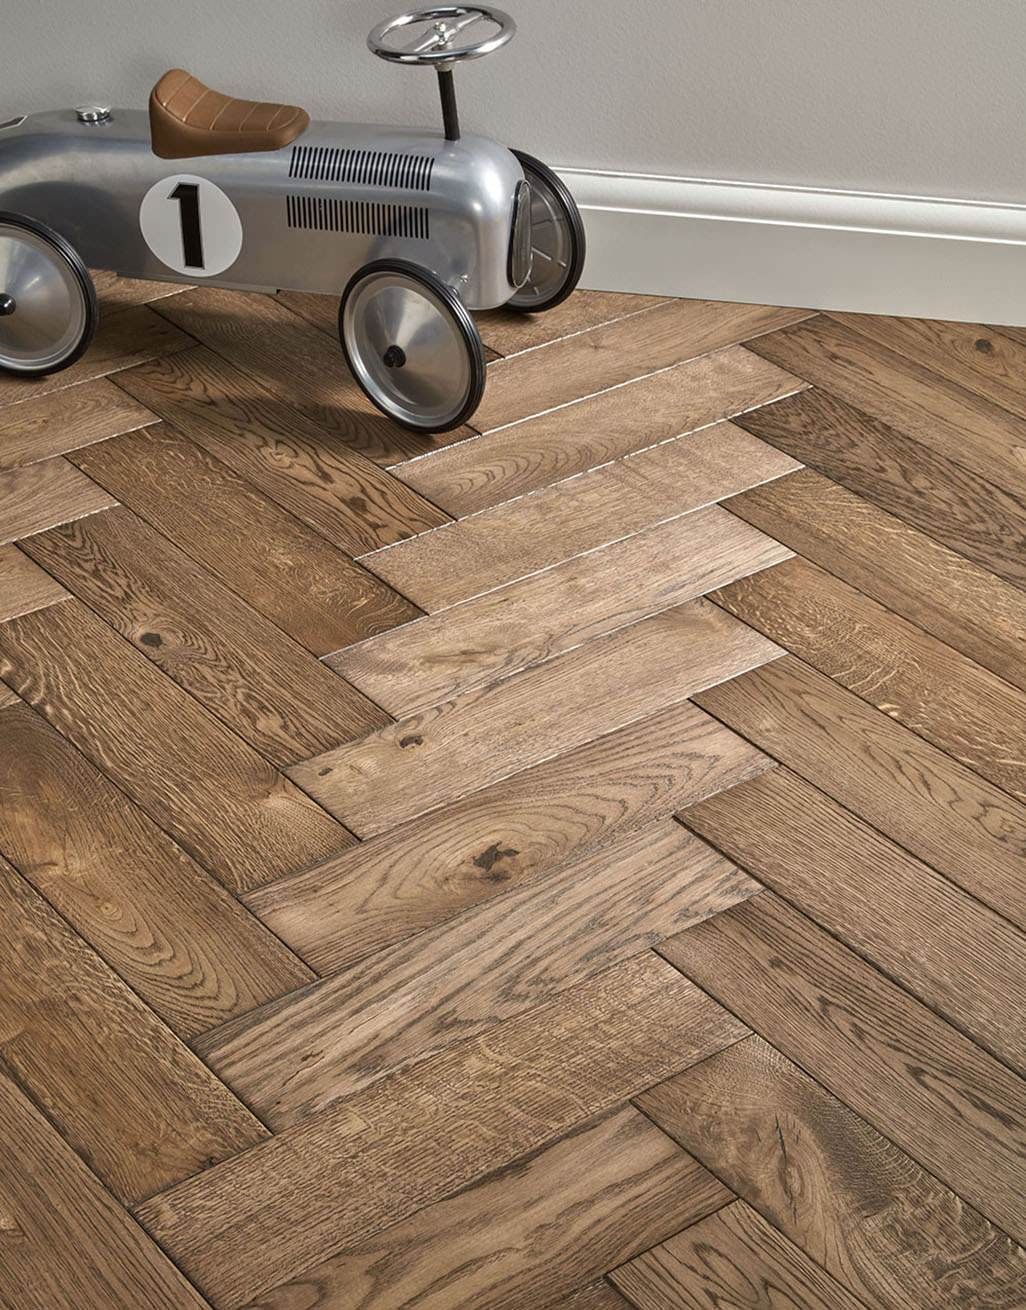 A buyers’ guide for solid bamboo flooring